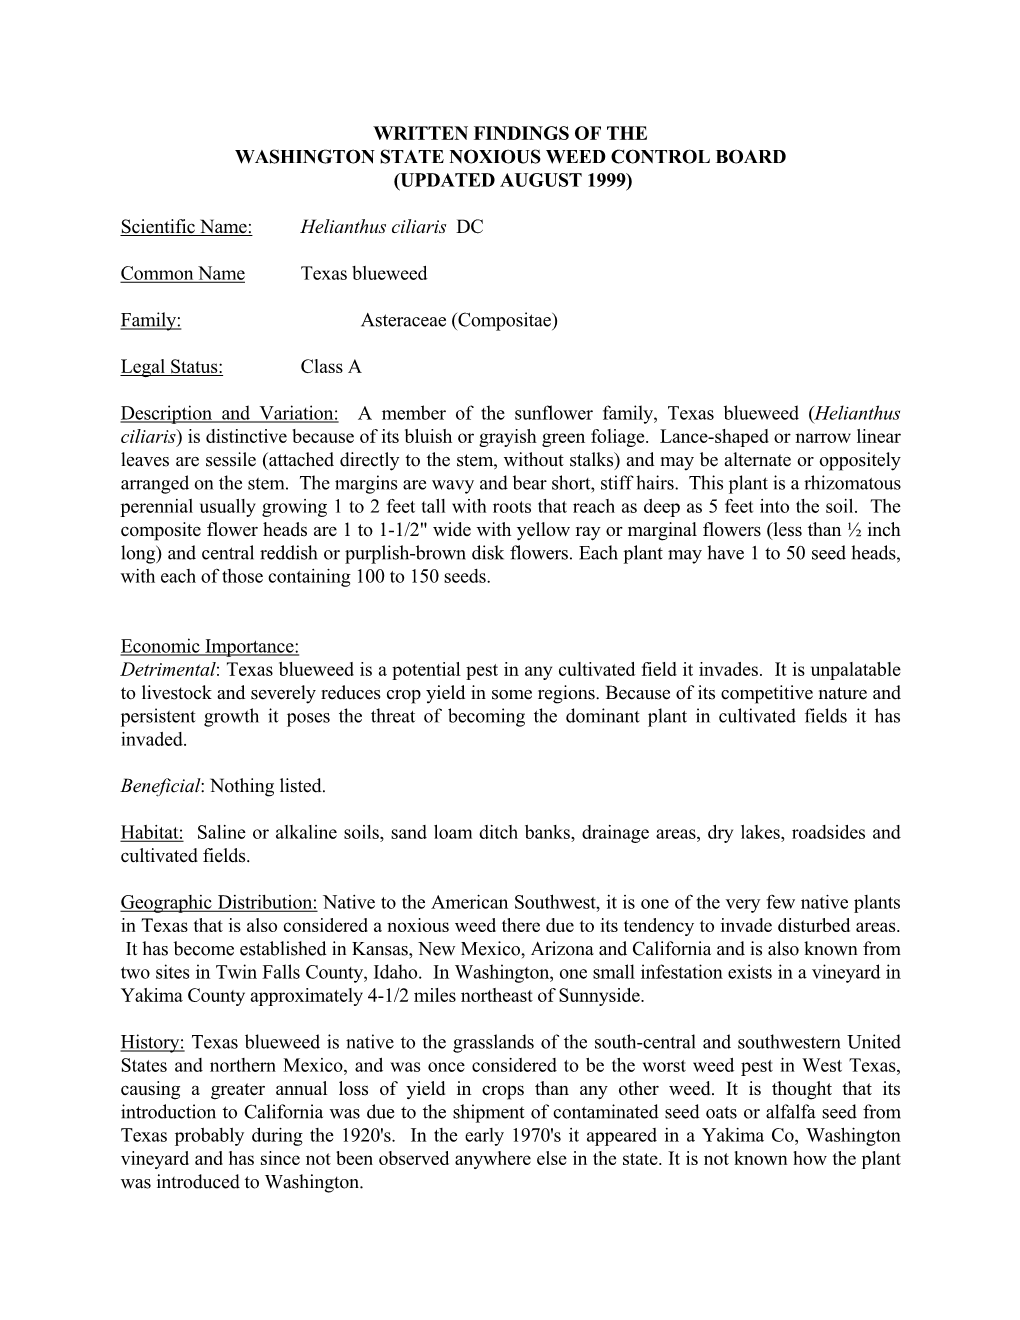 WRITTEN FINDINGS of the WASHINGTON STATE NOXIOUS WEED CONTROL BOARD (UPDATED AUGUST 1999) Scientific Name: Helianthus Ciliaris